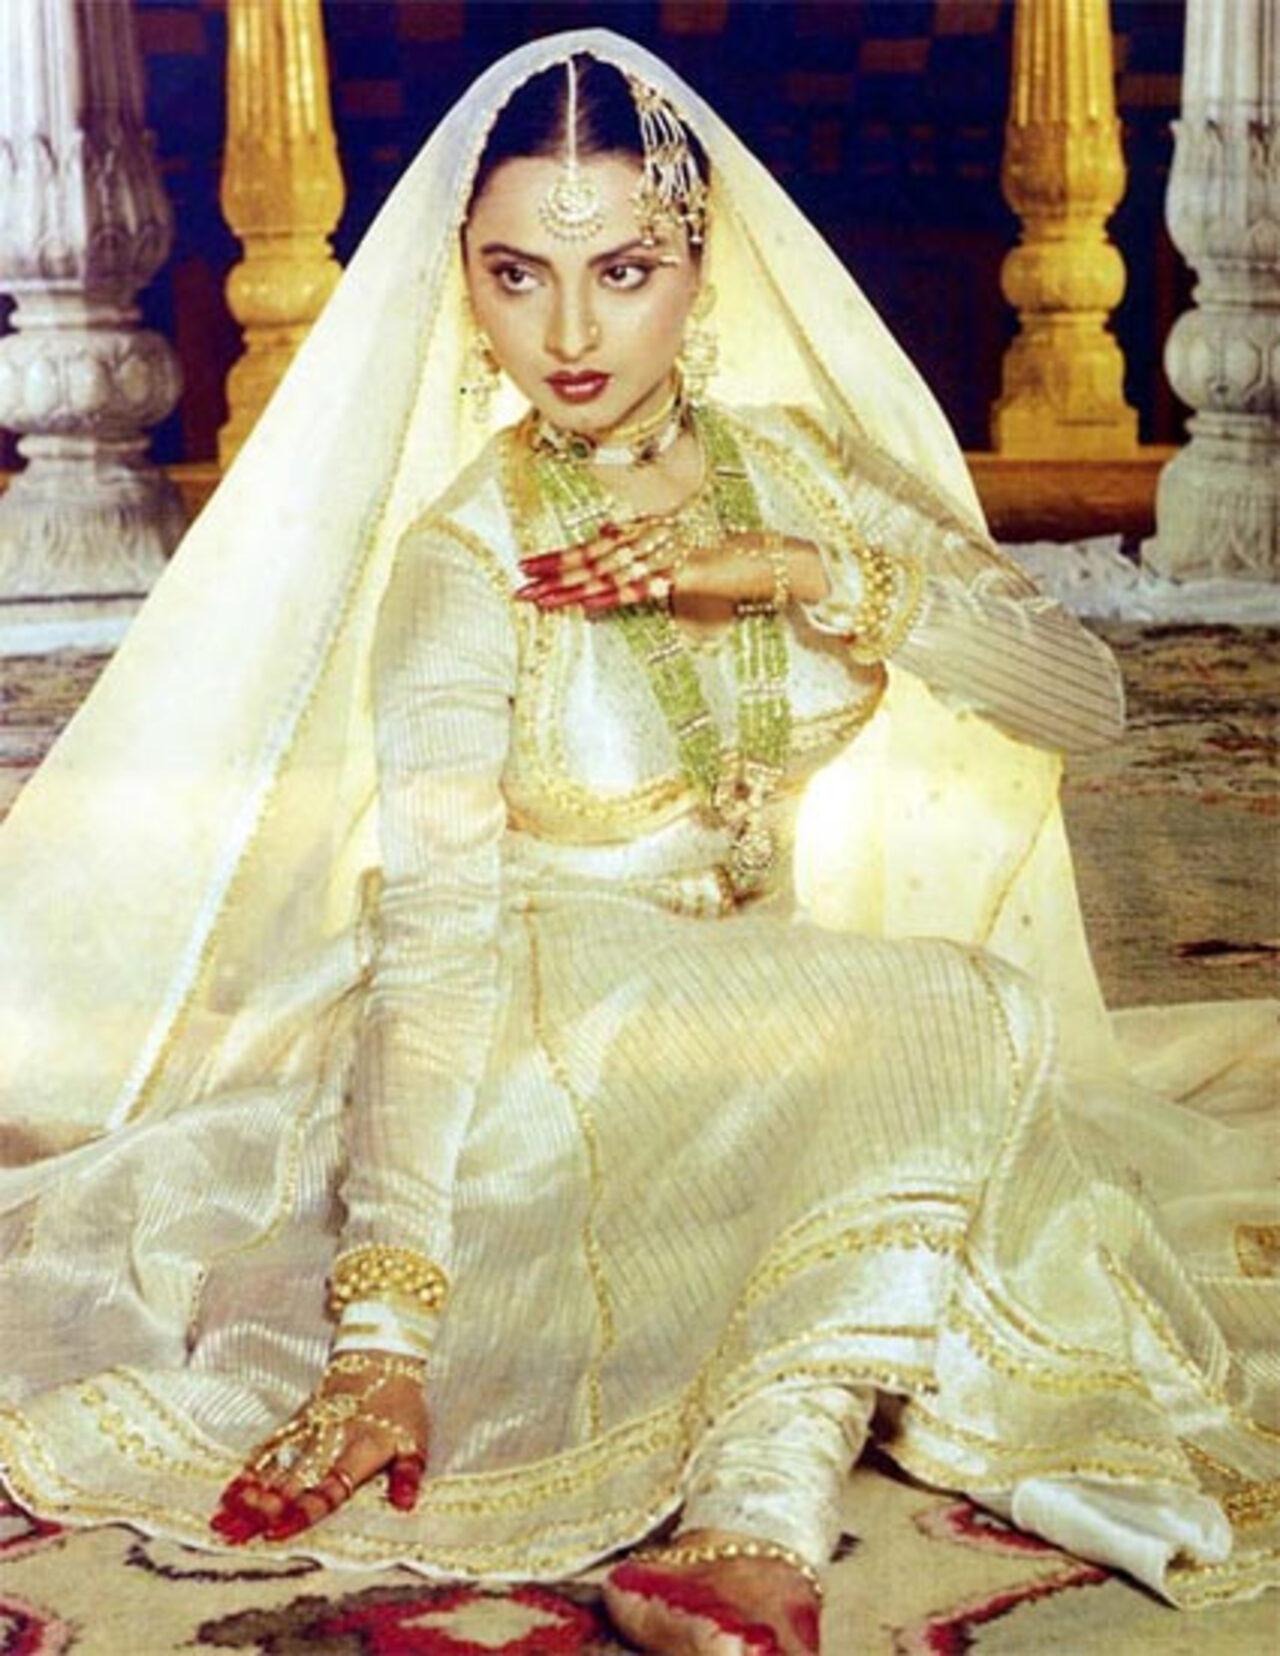 Evergreen actress and yesteryear icon Rekha essayed the role of Amiran/Umrao Jaan in the 1981 film. The songs 'Dil Cheez Kya Hai' and 'In Ankhon Ki Masti Ke' have been stuck with cinephiles across generations. 